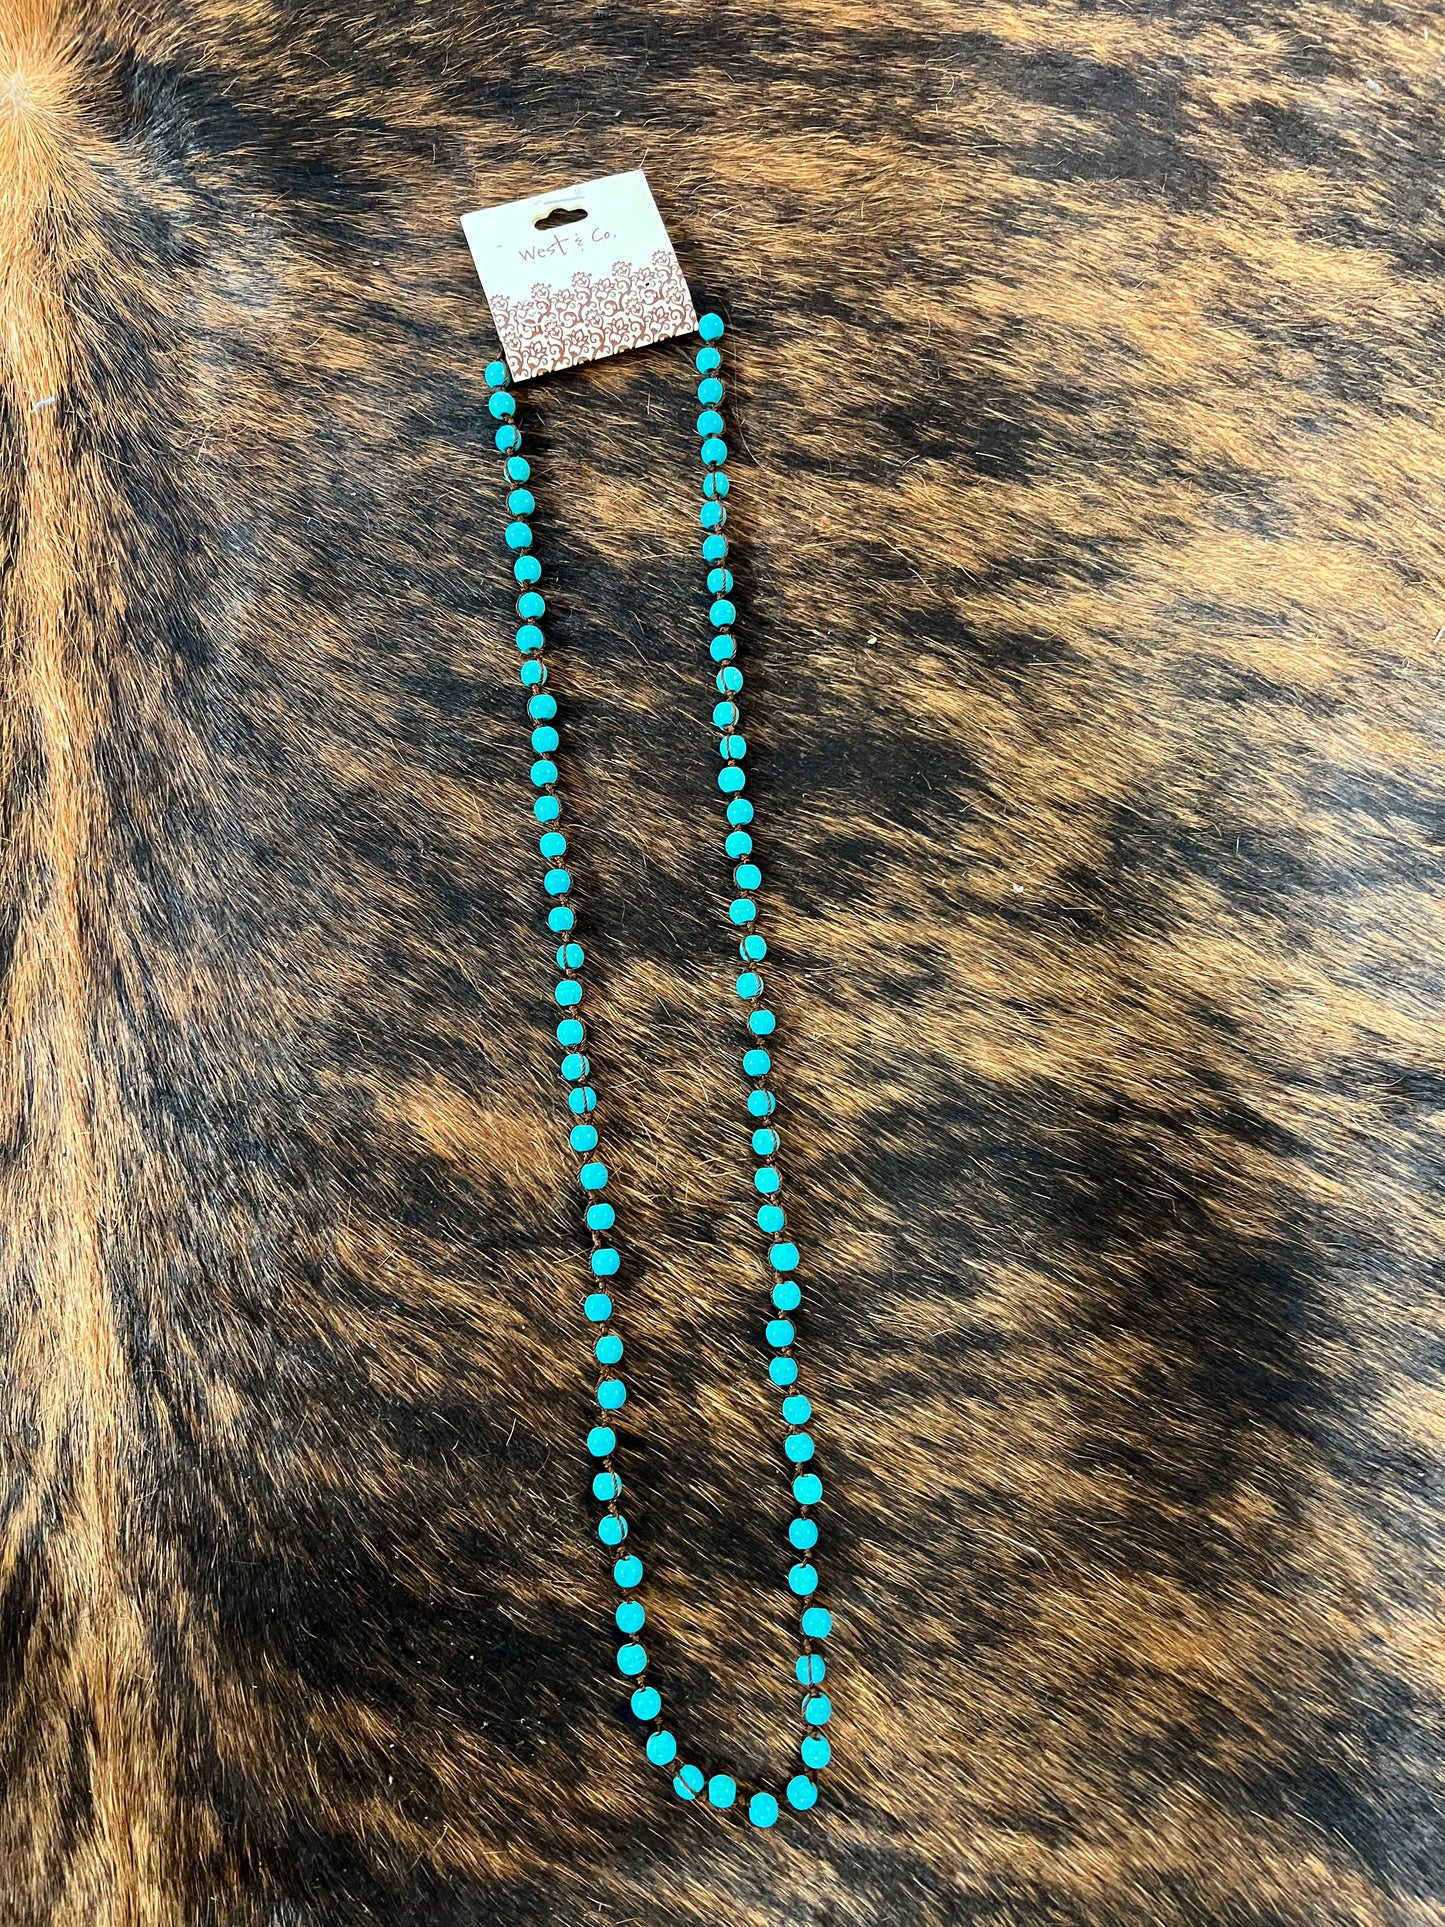 The Turquoise Bead Necklace